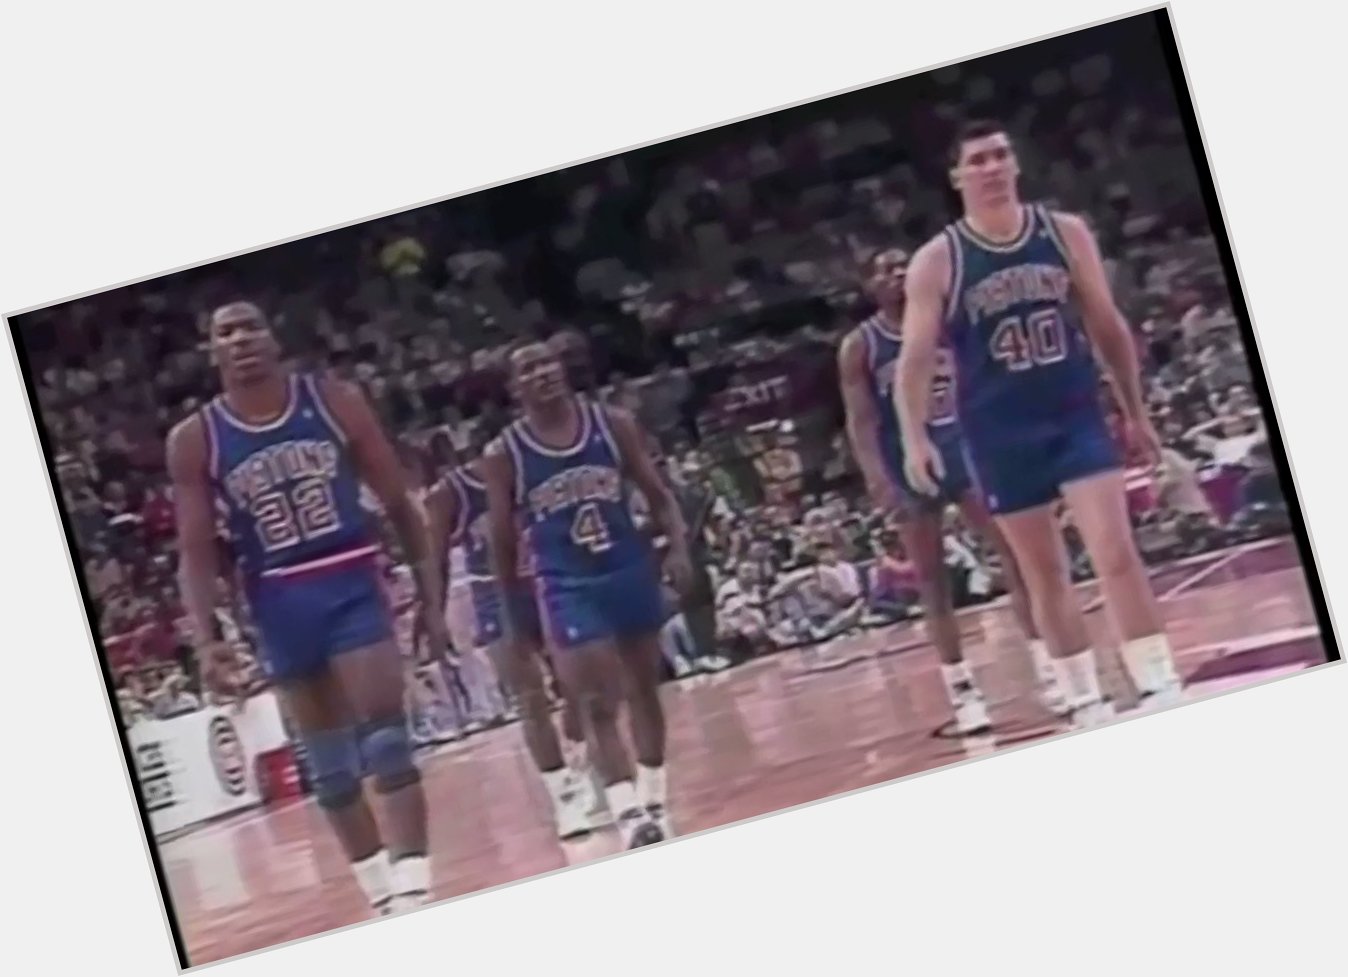 Happy 64th Birthday to Bill Laimbeer!

One of the OG Bad Boys  